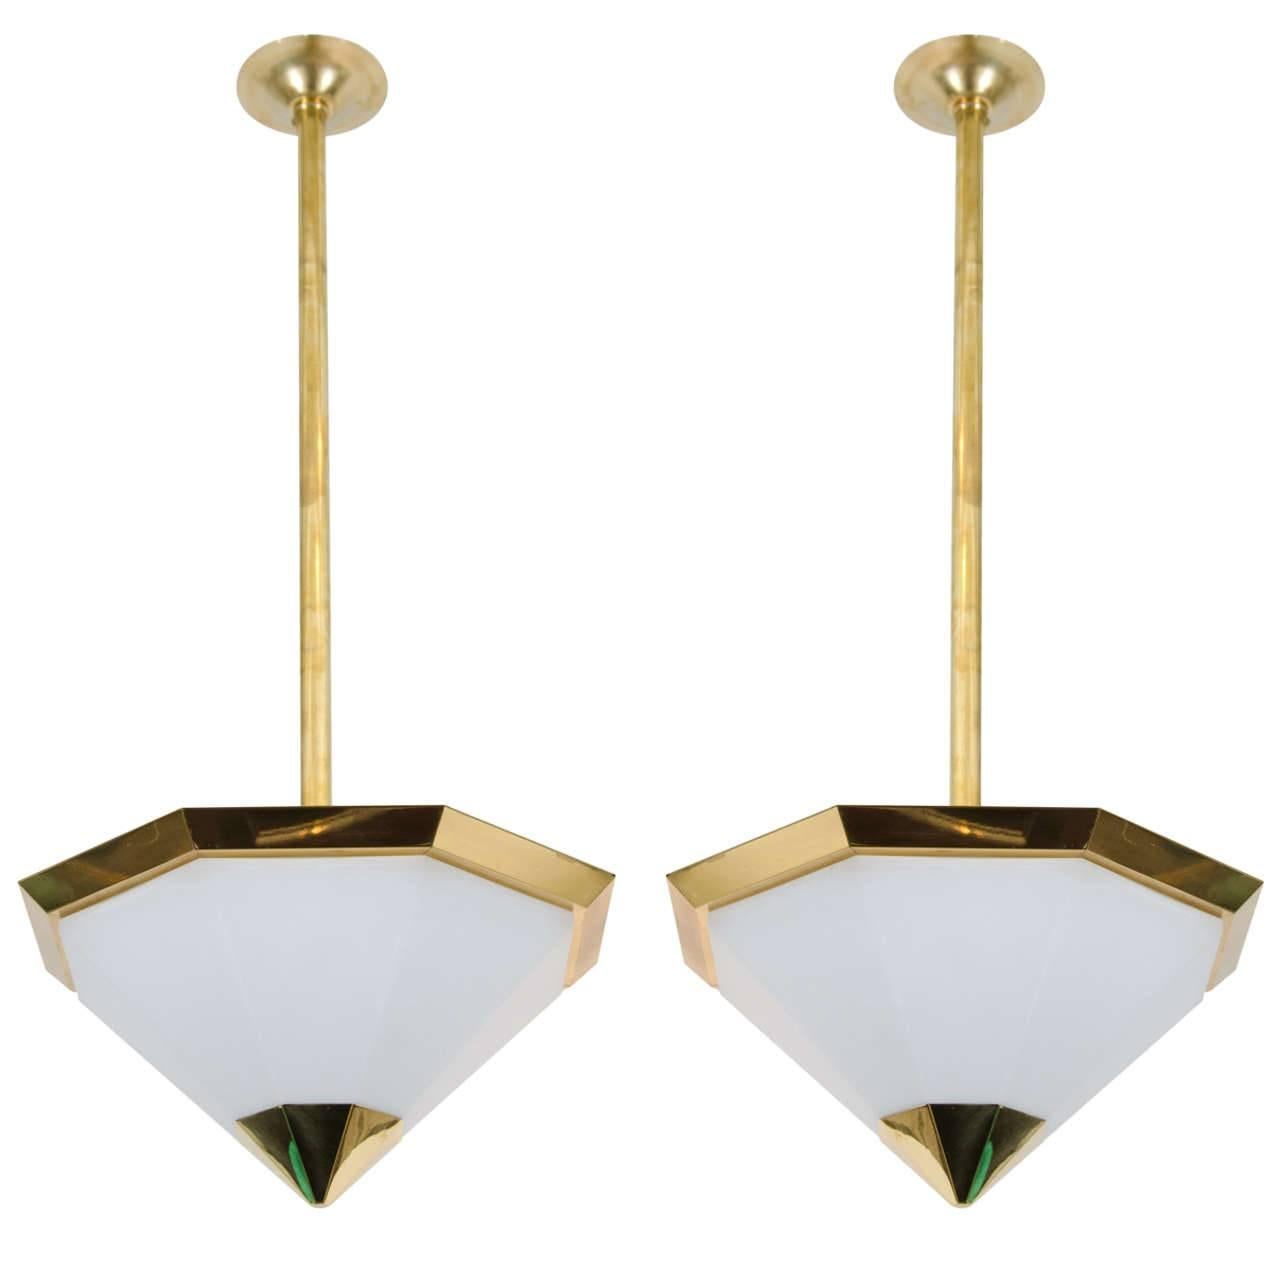 Pair of Octagonal Brass and Frosted Glass Pendant Light Fixtures, Germany, 1970s